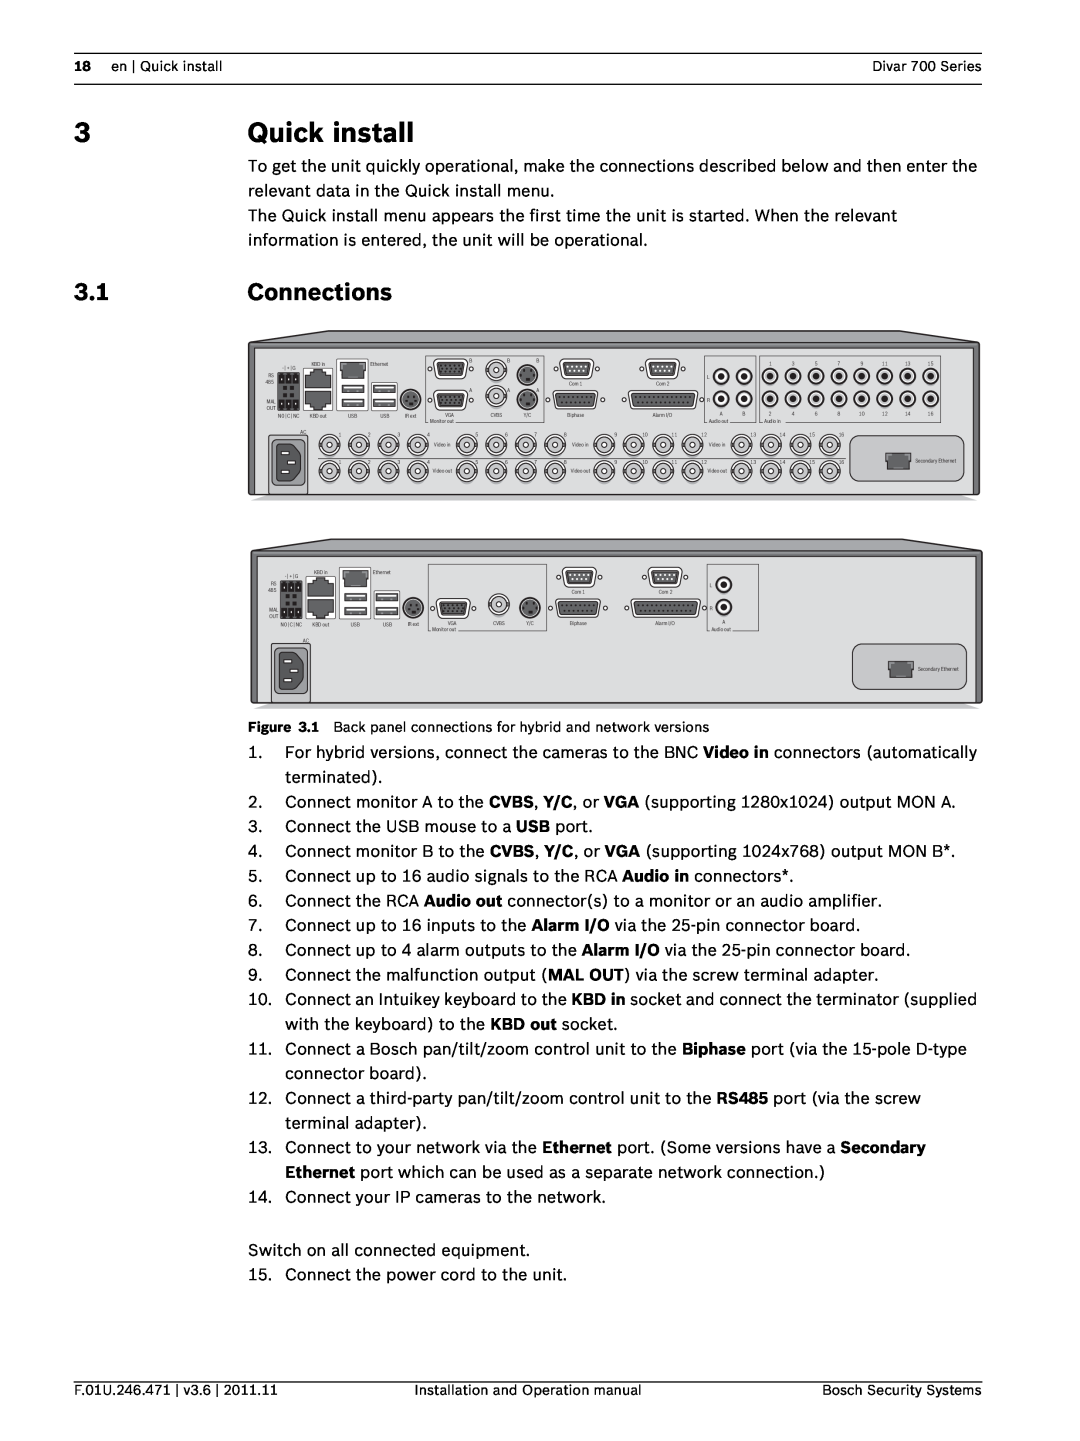 Bosch Appliances 700 operation manual Quick install, 3.1Connections 